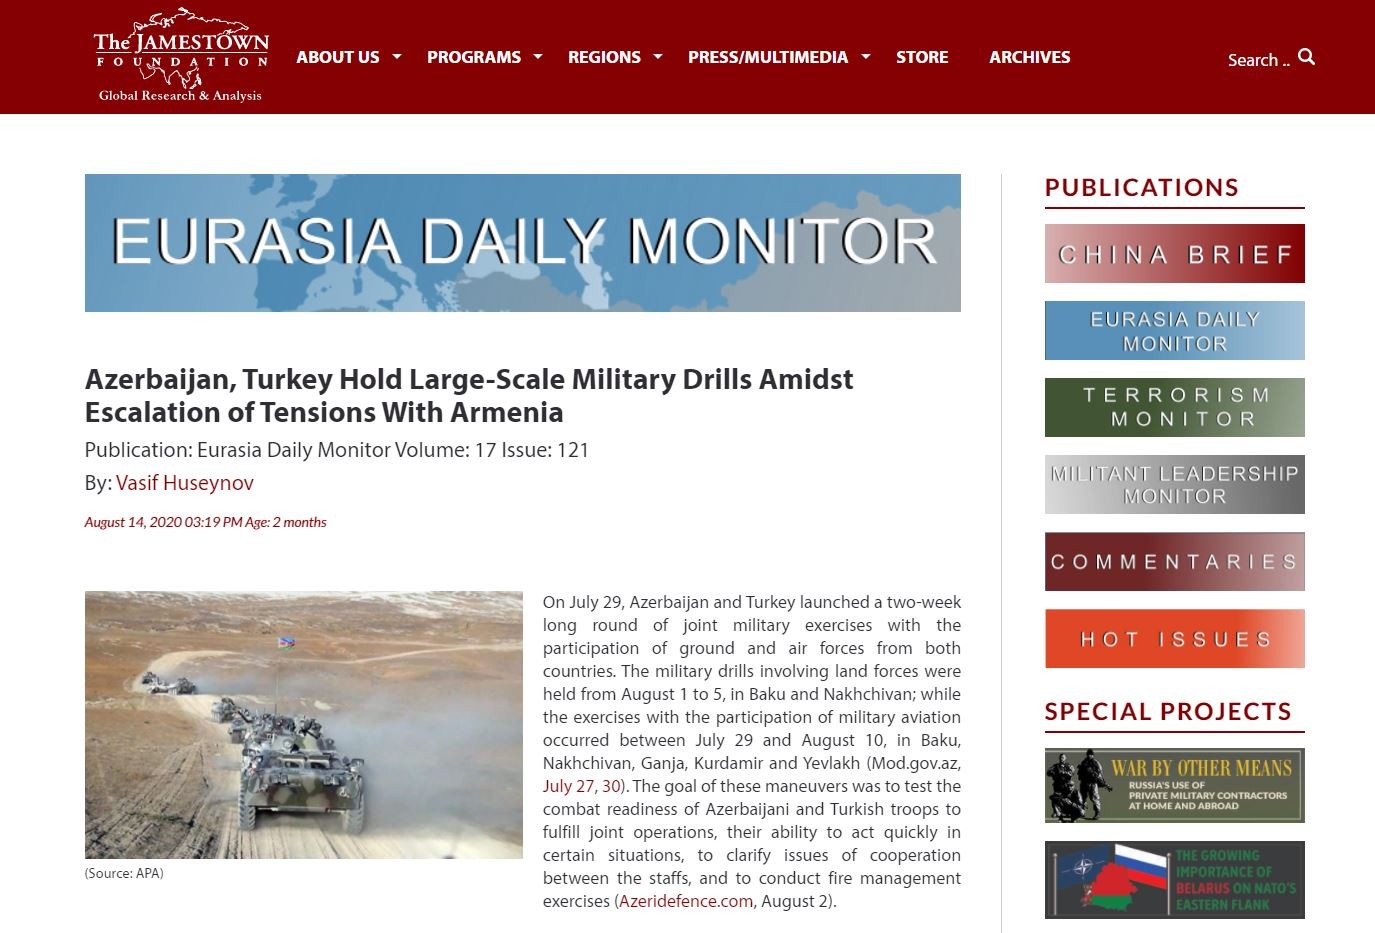 Azerbaijan, Turkey Hold Large-Scale Military Drills Amidst Escalation of Tensions With Armenia